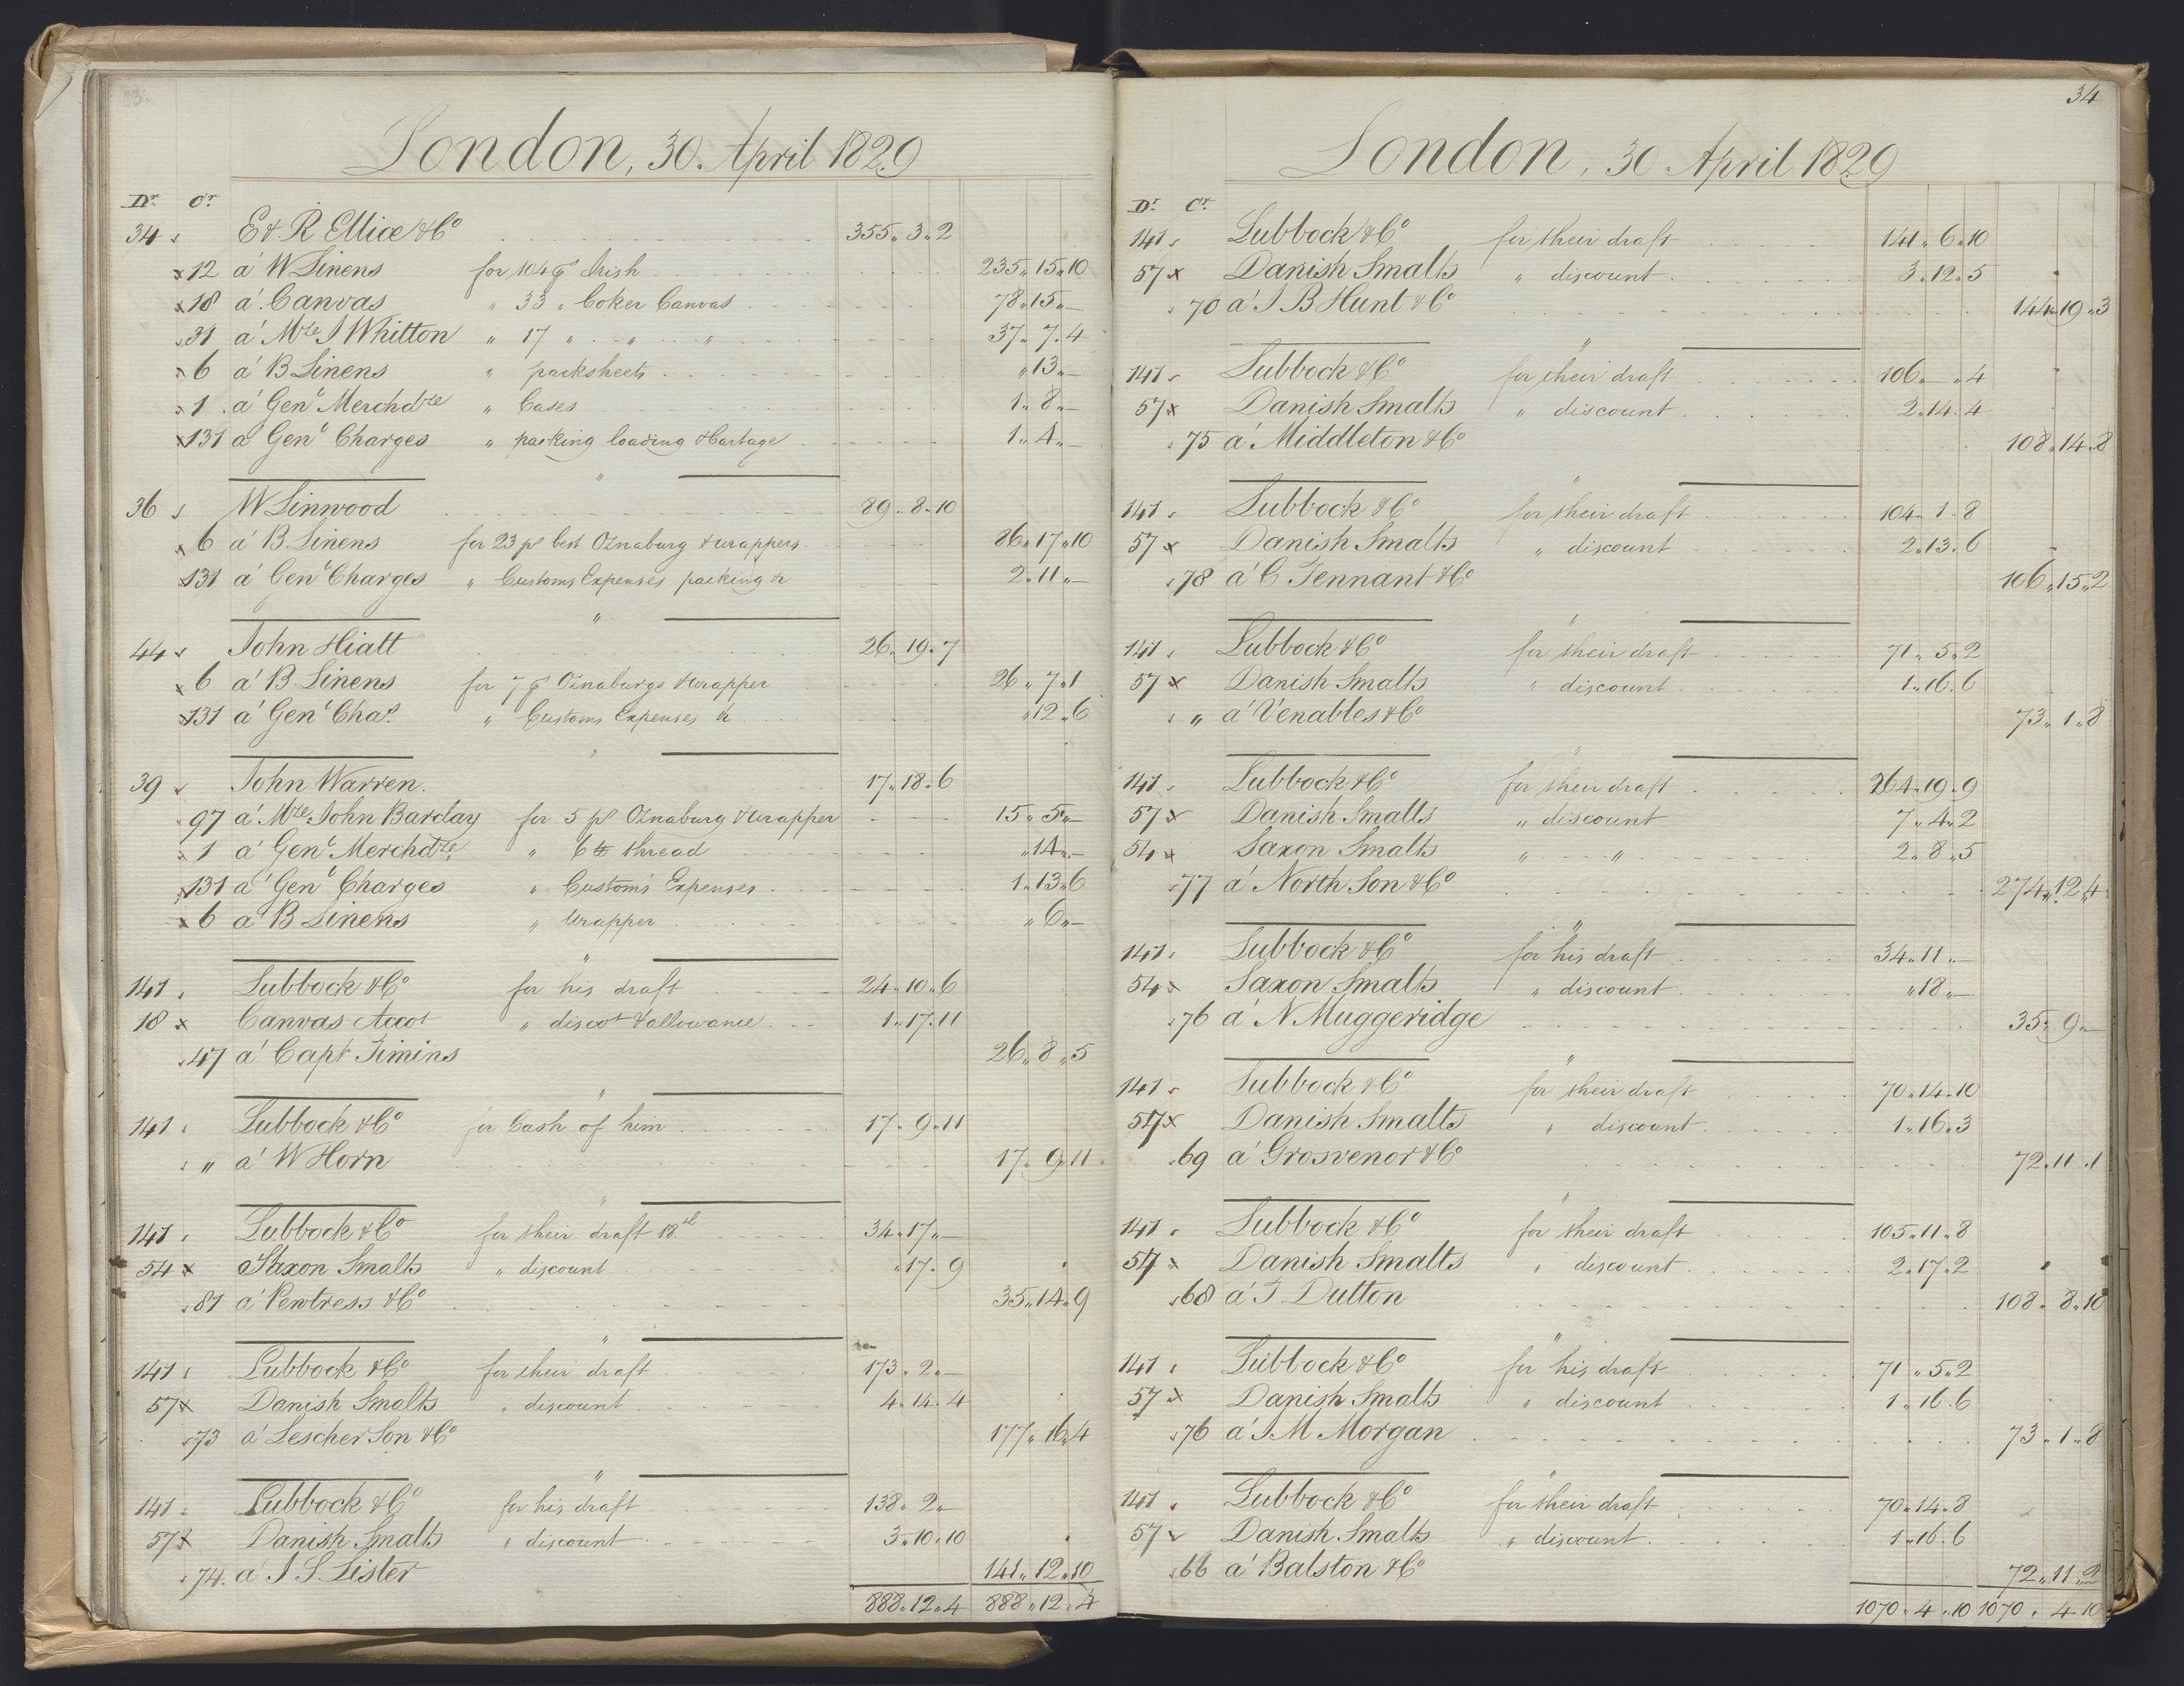 Smith, Goodhall & Reeves, RA/PA-0586/R/L0001: Dagbok (Daybook) A, 1829-1831, p. 33-34